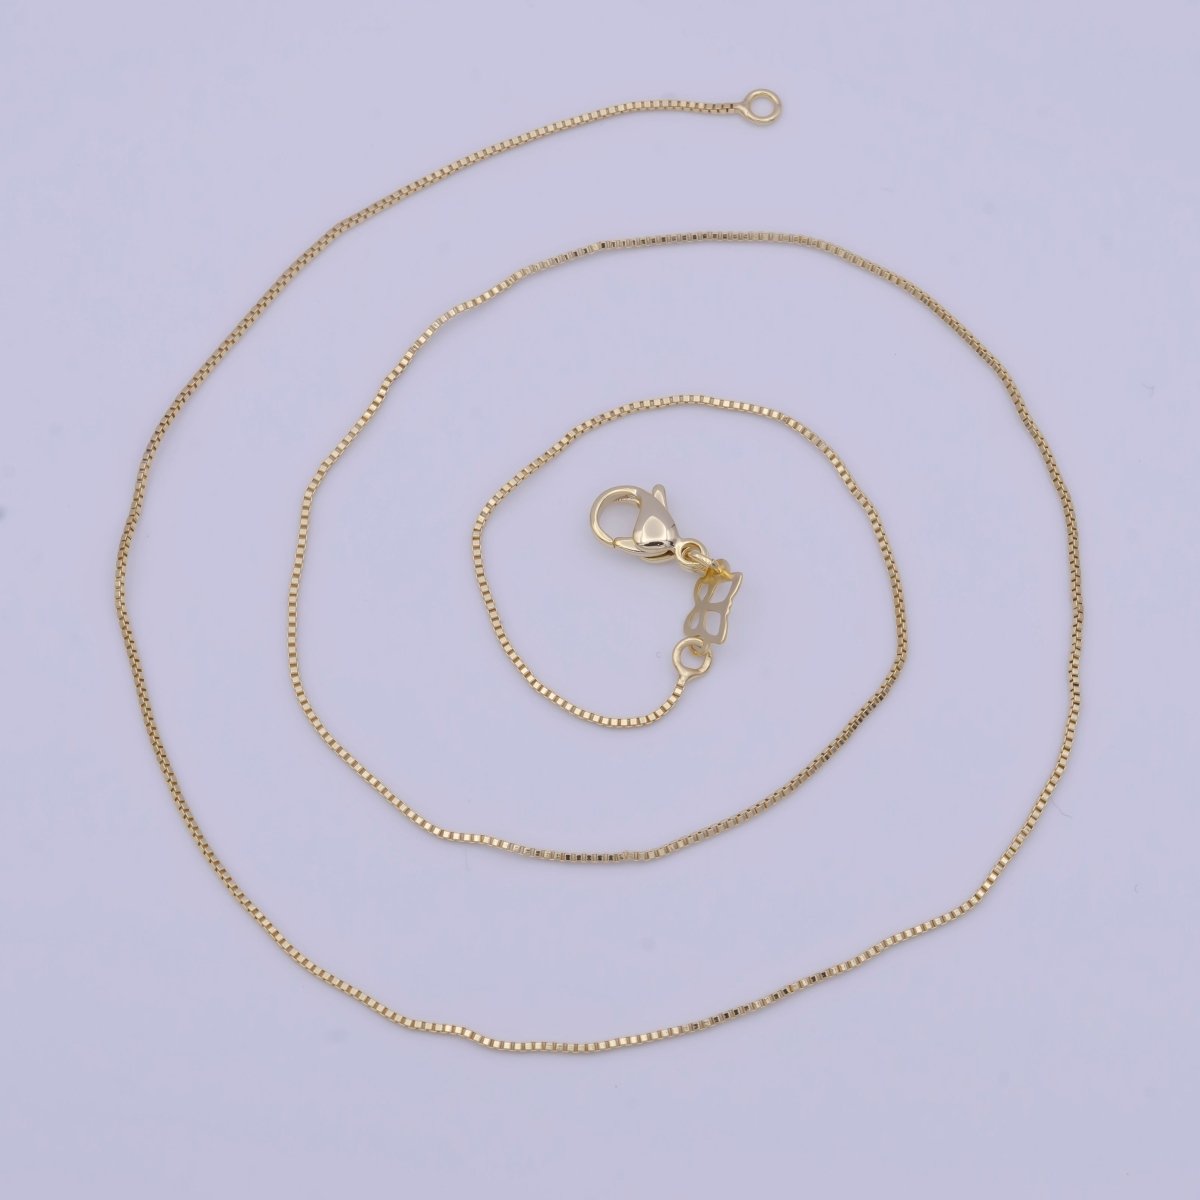 Dainty Box Chain 14k Gold Filled Box Chain, Everyday Jewelry, Essential Layering Chain Ready To wear Necklace | WA-1111 WA-1153 Clearance Pricing - DLUXCA